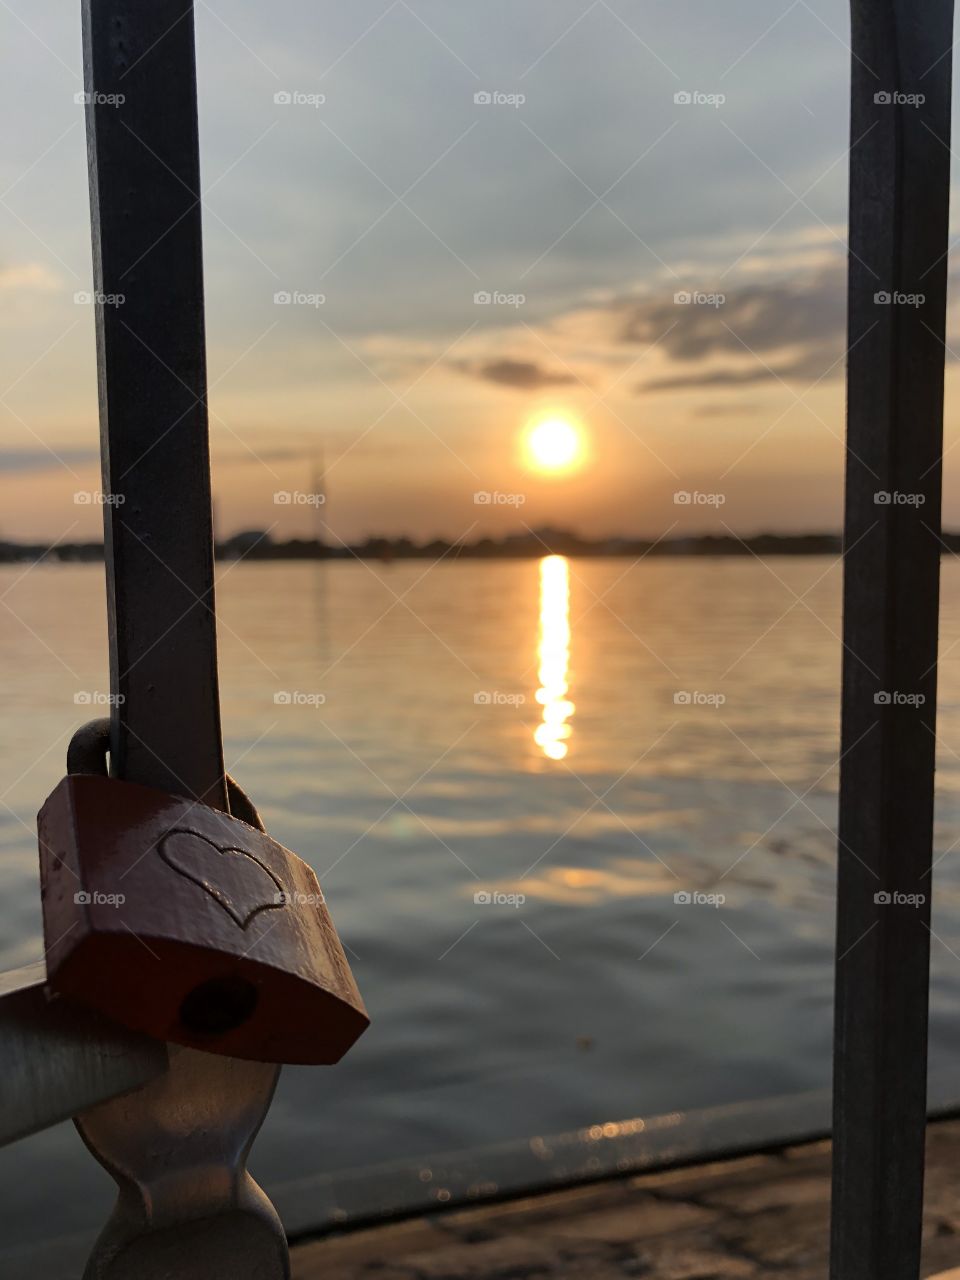 Love lock with a sunset in Hamburg. Romantic times.